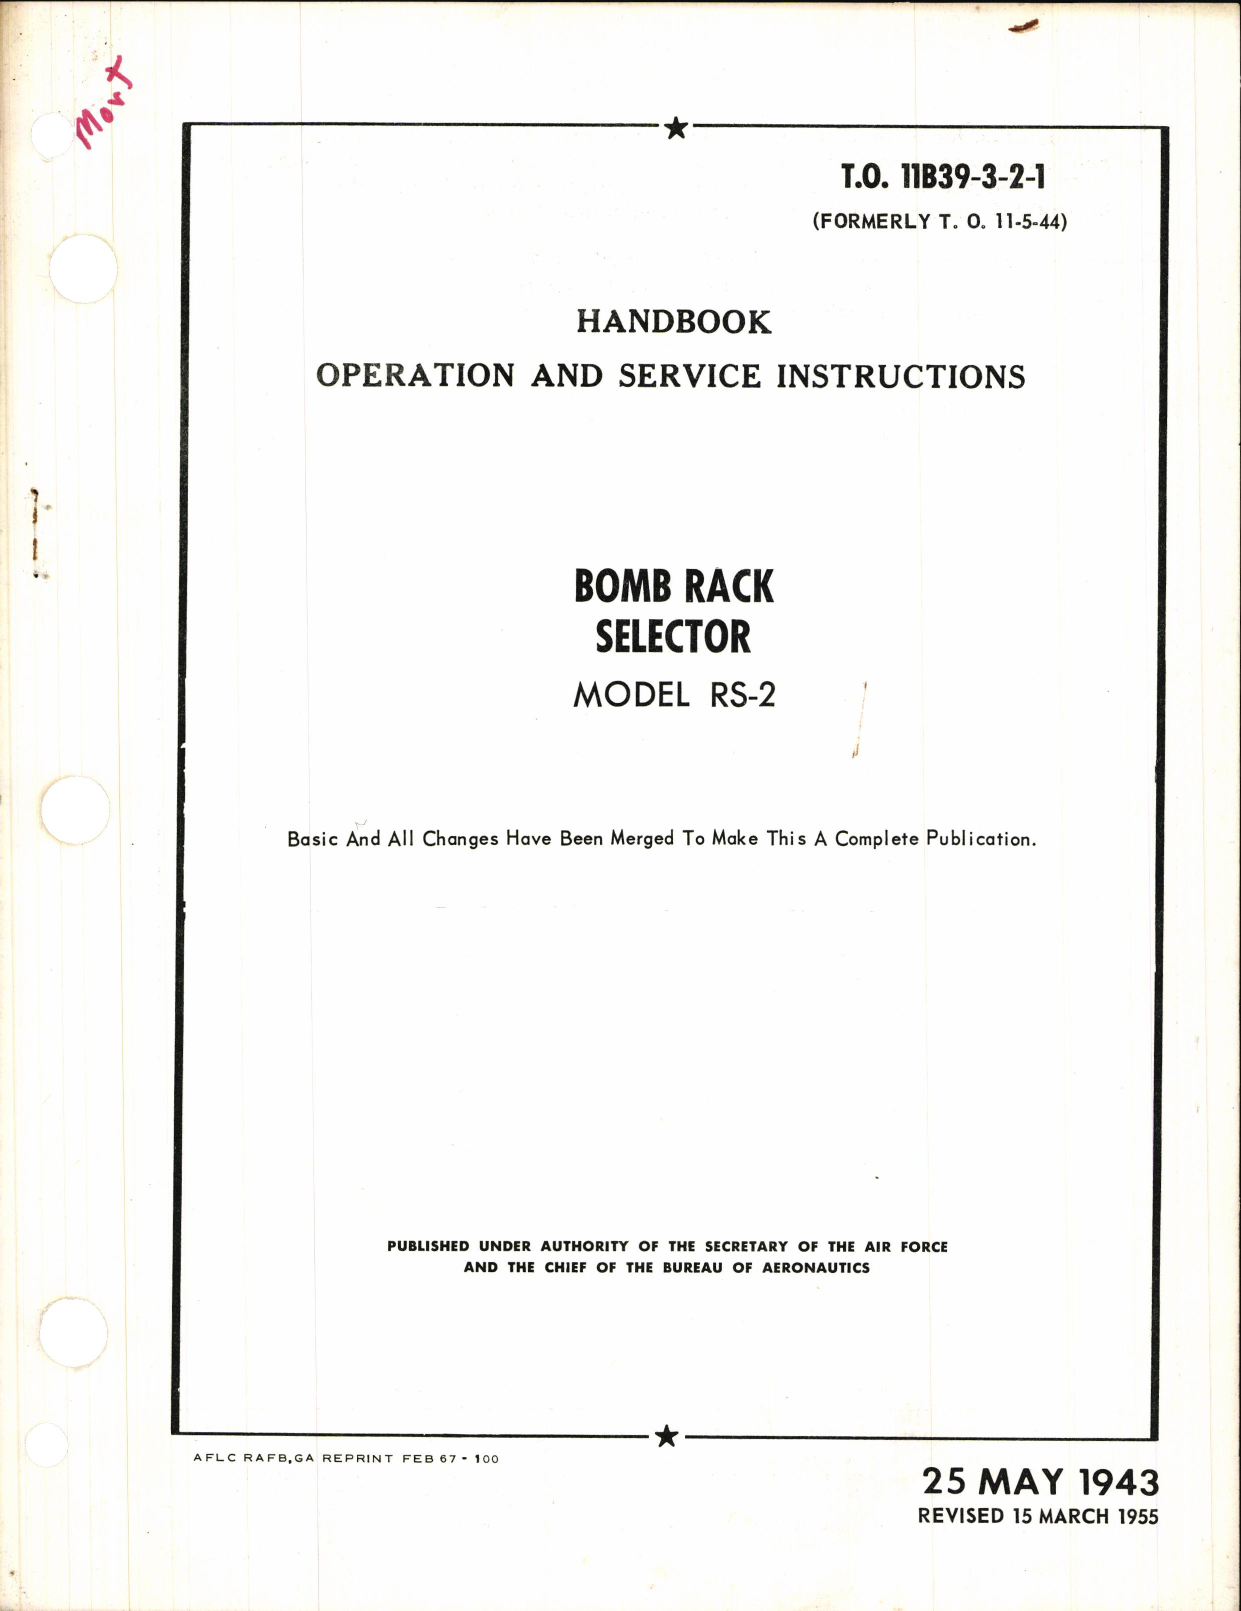 Sample page 1 from AirCorps Library document: Operation and Service Instructions for Bomb Rack Selector Model RS-2